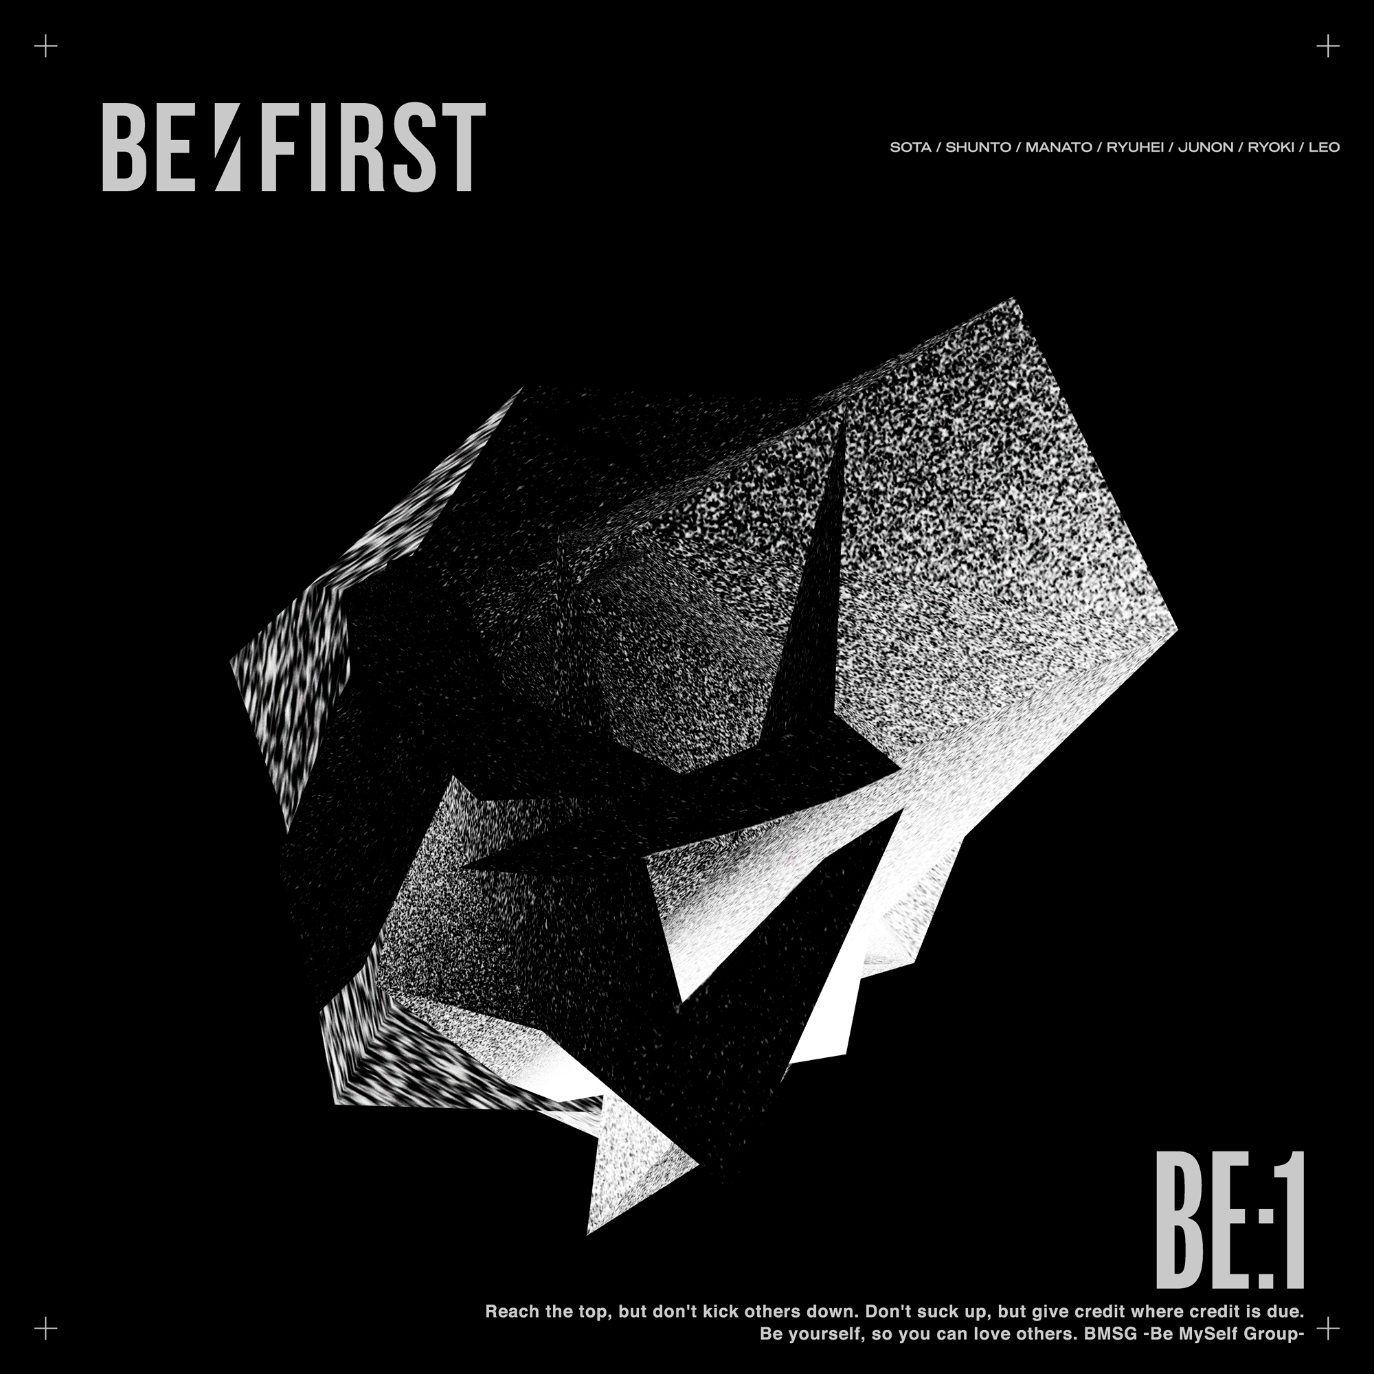 BE:FIRST 1stアルバム『BE:1』